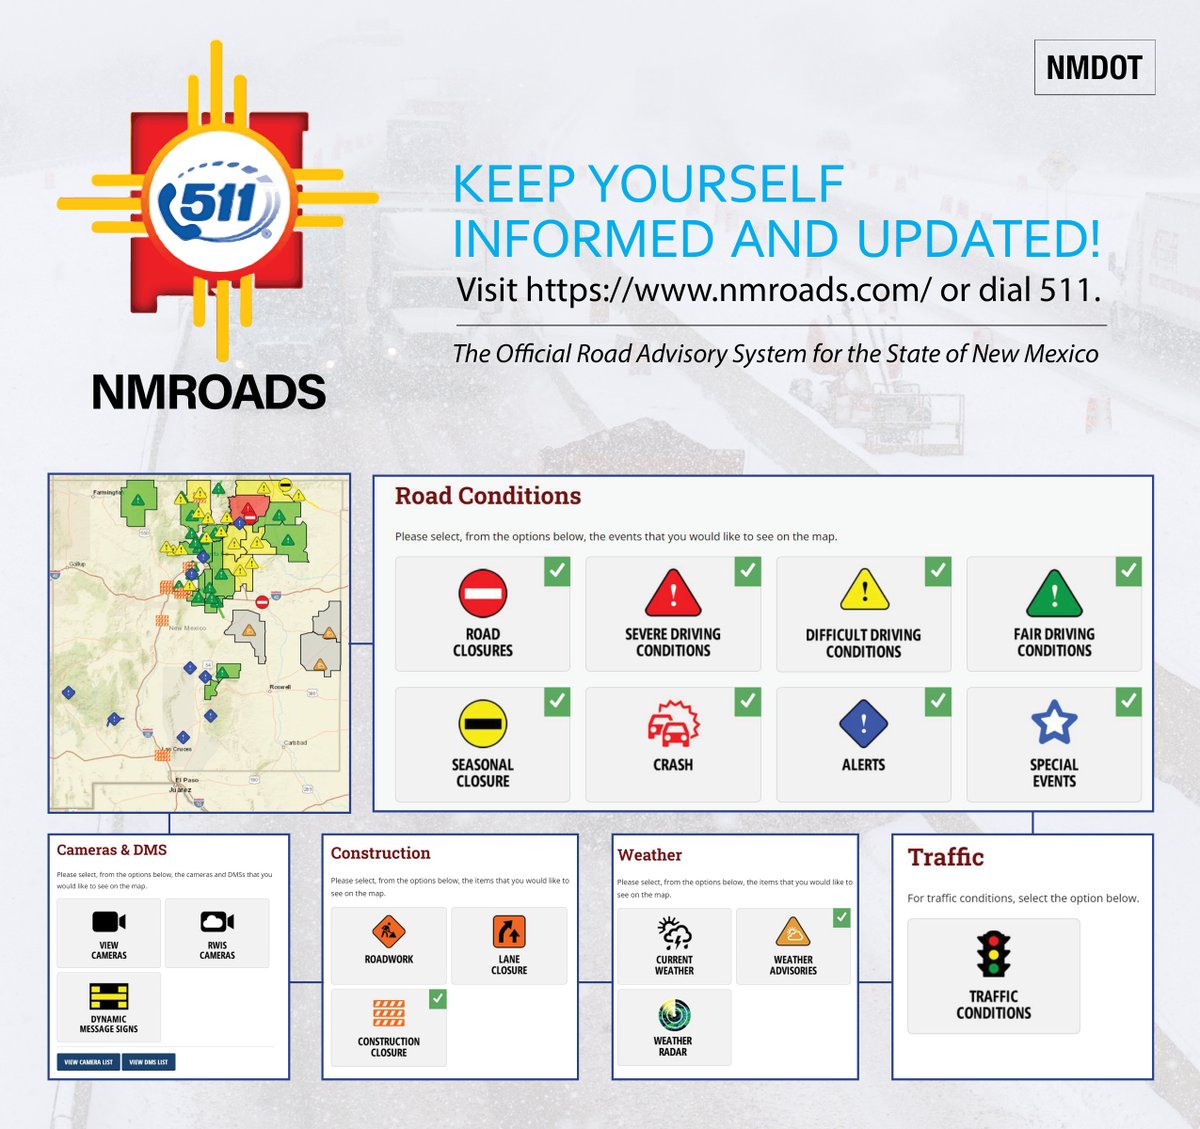 STAY UPDATED! Visit nmroads.com or dial 511 and get the most updated road conditions and closures. Get you and your family to your destination safely #NMDOTcares #nmdot #nmroads #nmwx